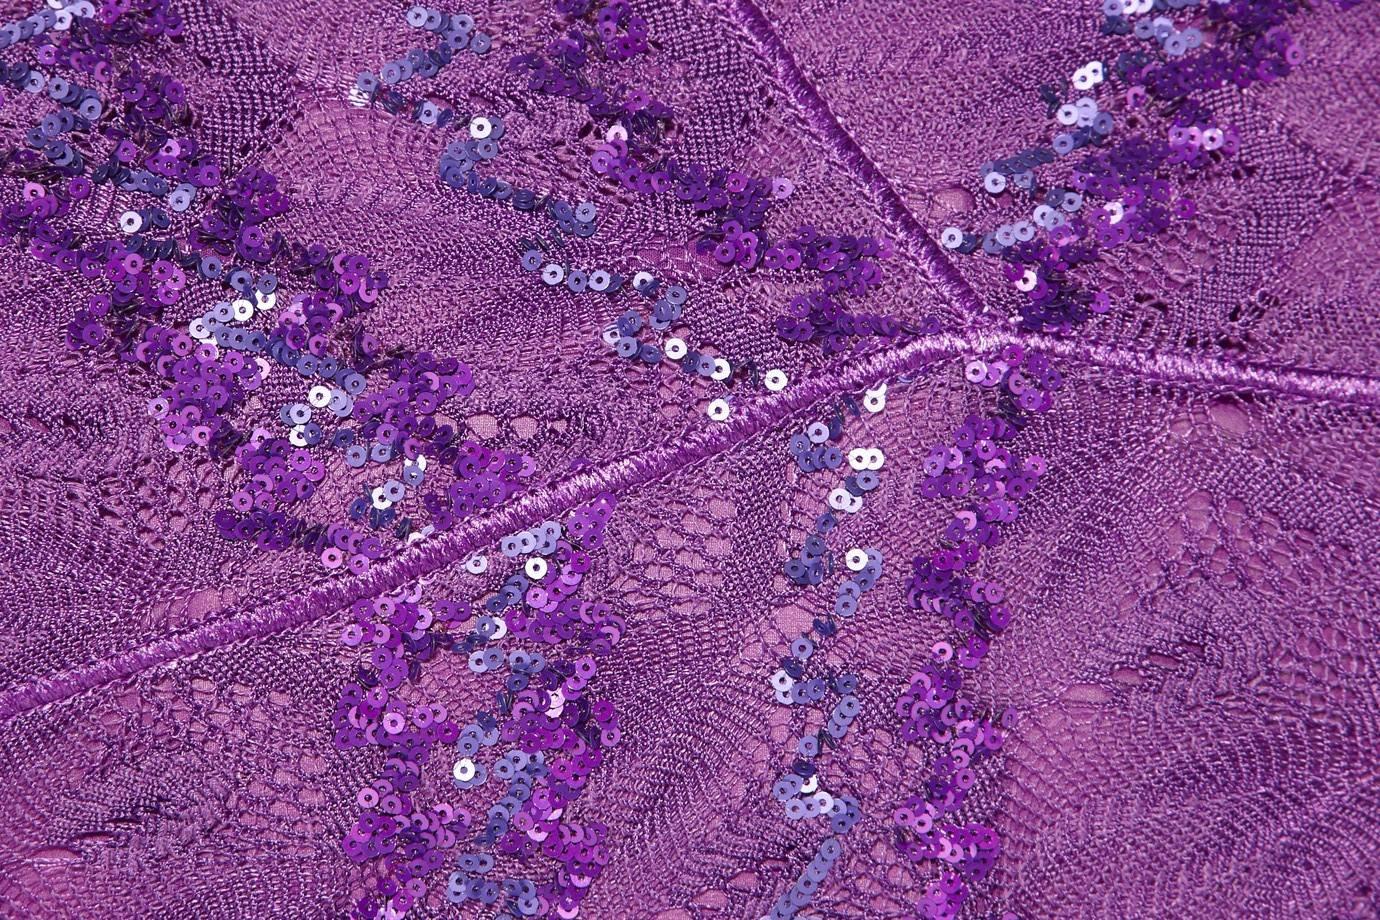 A very elegant sequined crochet-knit gown in Missoni's signature crochet knit fabric
Gorgeous piece, perfect for a classy evening 
Stunning purple color, embroidered with beautiful shiny sequins.
The dress is fully lined
Boned corset on the inner